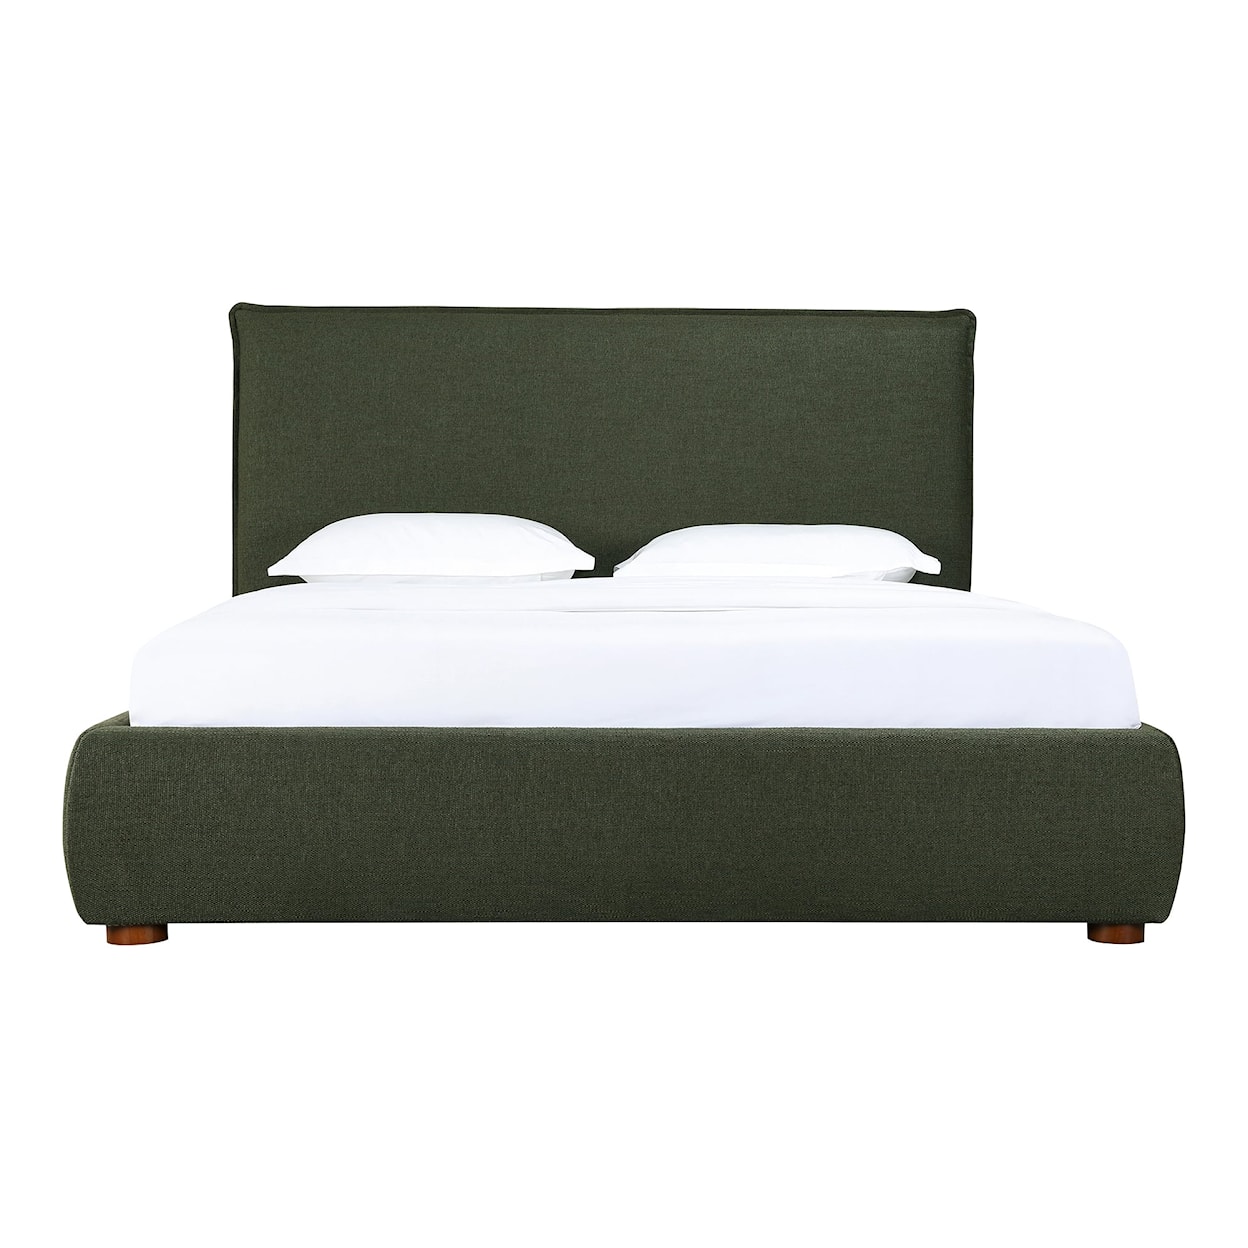 Moe's Home Collection Luzon Upholstered Queen Bed